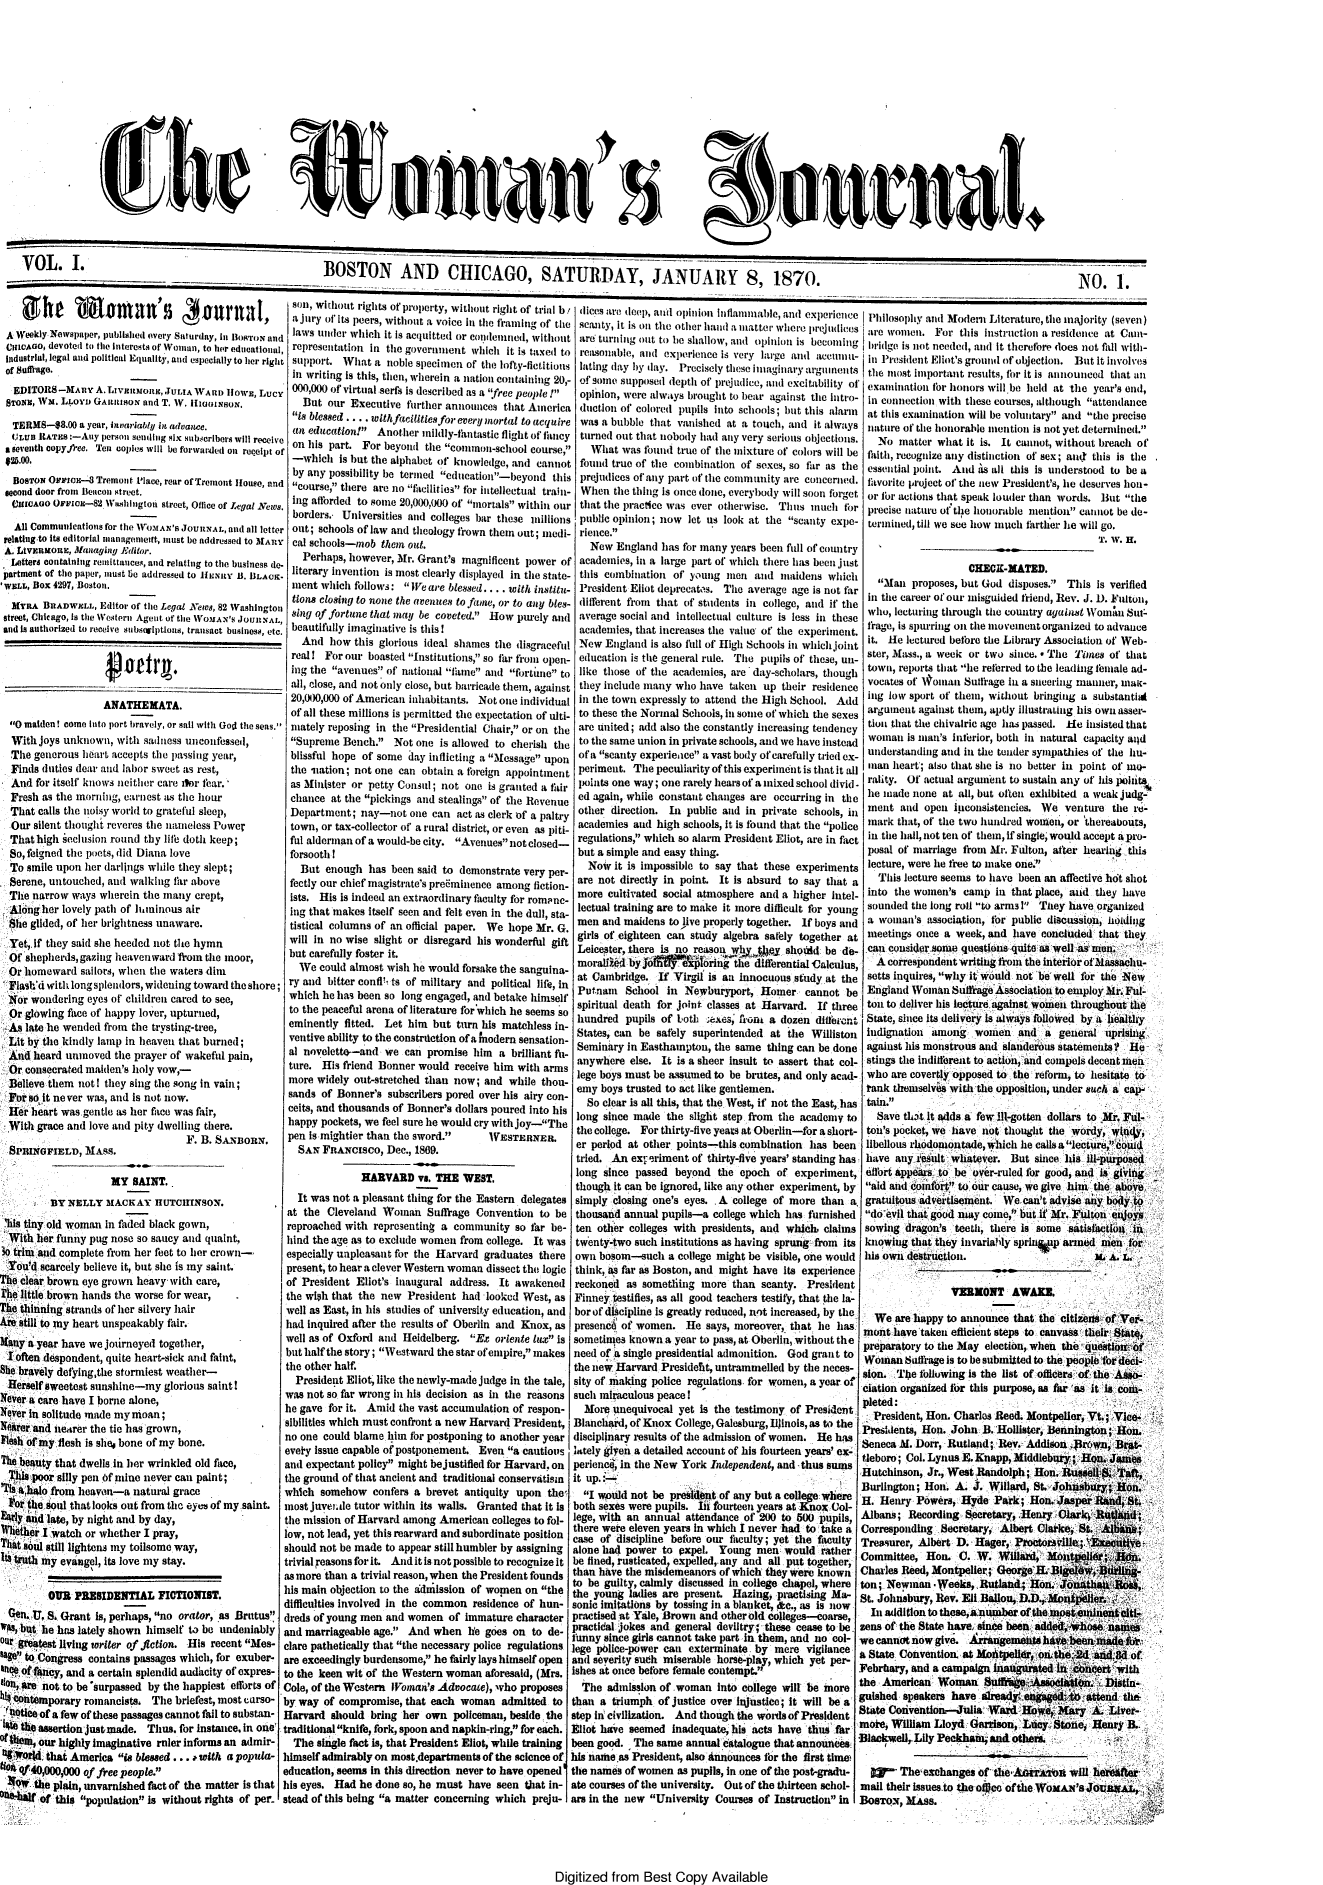 handle is hein.journals/wmjrnl1 and id is 1 raw text is: 
















)


VOL. .                                                   BOSTON AND CHICAGO, SATURDAY, JANUARY 8, 1870.                                                                                               NO. 1.


A  Weekly Newspaper, published every Saturday, In nowroN and
hIcAGo,  devoted to tile interests of Wmian, to her educational,
1ndustria, legal and political Equality, and especially to her right
of suffrage.
   EDITORS-MARY   A. LivnhoCJULIA   WARD  IIowE, Lucy
 STONE, Wn. LLOYD GARRISON and T. IV. iIGiiBUN.
 TERlMS-88.00  a year, invariably it advalce.
 CLUn  RATEs:-Any  person seuding six subscribers will receive
 a Seventh oopyftec. Ten coples will be forwarded on receipt of

 BOsTON  Orc-4 Treimnt   Place, rear of Trenont House, and
 second door front Beacon street.
 (ICAGO   OrFVI--82 WasiIngtor street, Olice of Legal News.

   All Communications for the WeaAS's JOURnNAL, and all letter
 relating to its editorial Imanagenmen, must be addressed to MARY
 A. Ltvauxoni, Managing Editor.
 Letters conitaining renittances, and relating to the business de-
 partment of the paper, annut lie addressed to HunY B, BLACK-
 'WELL, BOX 4297, Boston.
 MYRA   BuADWnLs,  Editor of thie Legal News, 82 Washington
 street, Chicago, is the Western Agent of the WoMAN's JoURNAL,
 and is authorized to receive substalptions, transact business, etc.


         ________   4~ ~eiri.       _    ____

                   ANATHEMATA.
  0 maiden! come Into port bravely, or sail with God the seas.
  With joys unknown,  with sadness unconfessed,
  The generous hoart accepts the passing year,
  Finds duties dear and labor sweet as rest,
  And  for itself knows neither care star fear.'
  Fresh as the morning, earnest . the hor
  That calls the noisy world to grateful sleep,
  Our silent thought reveres the nameless Power
  That high seclusion round thy life doth keep;
  So, feigned the pocts, did Diana love
  To smile upon her darlings while they slept;
  Serene, untouched, and walking far above
  The narrow ways  wherein the many  crept,
  Along her lovely path of hminous air
  She glided, of her brightness unaware.
  Yet,.if they said she heeded not the hymn
  Of shepherds, gazing heavenward friom the moor,
  Or homeward  sailors, when the waters dim
  Flash'd with long spleinlors, widening toward the shore;
  Nor wondering eyes of children carted to see,
  Or glowing face of happy lover, upturned,
  As late he wended from the trysting-tree,
  Lit by the kindly lamp in heaven that burned;
  And heard unmoved  the prayer of wakefil pain,
  Or consecrated maiden's holy vow,-
  Believe them not! they sing the song in vain;
  For so it never was, and is not now.
  Her heart wasgentle as her face was fair,
  With grace and love and pity dwelling there.
                                   F. B. SsNoxzv.
  SPMRNOFIELD,  MASS.

                     MY  SAINT.
         BY  NELLY  MACKAY   HIJTCRINsON.
 hils tiny old woman in faded black gown,
 With  her funiy pug nose so saucy and quaint,
 3o trim and complete from her feet to her crown-
 You'd  scarcely believe it, but she is my saint.
The clear brown eye grown heavy, with care,
the little brown hands the worse for wear,
             The thinning strands of her silvery hair
   Are still to my heart unspeakably fair.


Many a year have we jrnirneyed together,
  Ioften despondent, quite heart-sick and faint,
She bravely defyingthe stormiest weather-
Herself sweetest sunshine-my   glorious saint!
Never a care have I borne alone,
Never In solitude made my moan;
Ne*er and neierer the tie has grown,
FlIesh of my flesh is she$ bone of my bone.
The beauty that dwells in her wrinkled old face,
  This poor silly pen of mine never can paint;
'Tis 4,hao from heaven-a natural grace               A
  For the soul that looks out from the eyes of my saint.
Eairy and late, by night and by day,                 t
  hether I watch or whether I pray,
Th1t soul still lightens my toilsome way,
Its truth my evangel, its love my stay.

         OUR  PRESIDENTIAL FICTIONIST.
  e.  U. S. Grant Is, perhaps, no orator, as Brutus
Ws, but he has lately shown himself to be undeniably
our geatest living writer of flction. His recent Mes-
sg  to Congress contains passages which, for exuber-
e  of 0ancy, and a certain splendid audacity of expres-
lion, are not to be surpassed by the happiest efforts of
S4ontemporary   romanelsts, The  briefest, most carso-
qaotiee of a few of these passages cannot fail to substan-
Sthe~  assertion justimade. Thus, for instance, in olie'
  thea1, our highly imaginative ruler informs an admir-
t X14d   that America is blessed ... with a popula- 1
ti06 of40,000,000 of free people.
liew  the plain, unvarnished fact of the matter is that
    0   of this population is without rights of per


son, without rights of Prperty, without rigmt of trimaI b
a  julry Of' Its peers, Without a voice in tie framiig of th
laws   unler which it is acluitted or condeimnired, withou
representation  in the govermnent  which it is taxed to
support.   What  a noble specimon of the lofty-fictitions
In  writing is this, then, wherein a nation containing 20,
000,000  of virtual serfs is described as a free people I
   But  our Executive further announces  that America
 is blessed .... withfaciities fo eeve rmrtl to acquire
 an education   Aoher'   m nlly-thntastic flight of fanscy
 onhis  part. Forbeyond   the commo-school   course,
 -which   Is but the alphabet of knowledge, and canno
 by any possibility be termed edueation-beyond  thi
 course, there are no lellities for intellectual train
 ing afordednto some 20,000,000 of mortals within ou
 borders. Universities amd colleges bar thse unilio
 out; schools of law and theology frown thet out; mdi
 cal scools-mob   theem out.
   Perhaps, however, Mr. Grant's inagnificent power o
 literary inventioml is most clearly displayed in the state
 mRent Which follows: We  are blessed . . .. with institu.
 lions closing to nsone the (eenues to fane, or to any bles
 sing of fortune that may be coveted. How purely and
 beautifully imaginative is this!
   And  how  this glorious ideal shames the disgraceful
 real! For our  boasted Institutions, so far from open
 ing time avenues of national fime and fortune to
 all, close, and not only close, but barricade them, against
 20,000,000 of American inhabitants. Not one individual
 of all these millions is permitted the expectation of ulti-
 inately reposing in the Presidential Chair, or on the
 Supreme  Bench.  Not  one is allowed to cherish the
 blissful hope of some day inflicting a Mssage upon
 the 'nation; not one can obtain a ftreign appointment
 as Minister or petty Consul; not one is granted a tfair
 chance  at the pickings and stealing.s of the Revenue
 Department;  nay-not  one  can act as clerk of a paltry
 town, or tax-collector of a rural district, or even as piti-
 ful alderman of a would-be city. Avenues not closed-
 forsooth!
   But  enough  has been said to demonstrate very per-
 fectly our chief magistrate's pre6minence among fiction-
 ists. His is Indeed an extraordinary faculty for rom nc-
 ing that makes itself seen and felt even In the dull, sta-
 tistical columns of an official paper. We hope Mr. G.
 will in no wise slight or disregard his wonderful gift
 but carefully foster it.
   We could almost wish he would forsake the sanguina-
ry amd  bitter confil't s of military and political life, in
which   e has been so long engaged, and betake himself
to the peaceful arena of literature for which he seems so
eminently  fitted. Let him  but turn his matchless in-
ventive ability to the construction of a nodern sensation-
al novelette-and  we  can  promise him  a brilliant fit-
ture.  His friend Bonner would  receive him with arms
more  widely out-stretched than now; and  while thou-
sands  of Bonner's subscribers pored over his airy con-
ceits, and thousands of Bonnes dollars poured Into his
happy pockets, we feel sure lie would cry with joy-The
pen  is mightier than the sword.     WSTENER.
  SAN  FRANclsco,  Dec., 1869.

              HARVARD vs.   THE  WEST.
  It was not a pleasant thing for the Eastern delegates
at the  Cleveland Woman Surage Convention to be
reproached with  representing a community  so far be-
hind the age as to exclude women from college. It was
especially unpleasant for the Harvard graduates there
present, to hear a clever Western woman dissect th logic
of President Eliot's inaugural address. It awakened
the wish that the new  President hail looked West, as
well as East, In his studies of university education, and
had inquhmed after the results of Oberlin and Knox, as
well as of Oxford and Heidelberg.  E  oriente lu is
but half the story; Westward the star of empire, makes
the other half.
  President Eliot, like the newly-made judge in the tale,
was not so far wrong in his decision as in the reasons
he gave for it. Amid the vast accumulation of respon-
sibilities which must confront a new Harvard President,
no one could blame him for postponing to another year
evet'y Issue capable of postponement. Even a cautious
and expectant policy might bejustified for Harvard. on
the ground of that ancient and traditional conservatism
which  somehow  confers a brevet  antiquity upon the
most juvendsle tutor within its walls. Granted that it Is
time mission of Harvard among American colleges to fol-
low, not lead, yet this rearward and subordinate position
should not be made to appear still humbler by assigning
trivial reasons for It. Amdit is not possible to recognize it
as more than a trivial reason, when the President founds
ills main objection to the aduission of women on the
difficulties involved in the common residence of hun-
dreds of young men and women   of immature character
and marriageable age. And  when  lie goes on to de-
clare pathetically that the necessary police regulations
are exceedingly burdensome, he fairly lays himself open
to the keen wit of the Western woman  aforesaid, (Mrs.
Cole, of the Western Ioman's Advocate), who proposes
by way of compromise,  that each woman   admitted to
Harvard  should bring her own   policeman, beside the
traditional knife, fork, spoon and napkin-ring, for each.
  The sigle fact is, that President Eliot, while training
himself admirably on most.departments of the science of
education, seems in this direction never to have opened
his eyes. Had he done so, he must have  seen that in-
stead of this being a matter concerning which preju-


Digitized  from  Best  Copy  Available


  Idicestan depmilt 0 pimmioI I i)aImmmnble, and experiece
eScamiY, it Iskills the other Iamdaiateuwreir iles
t are turning out to be shallow, amid opiniot i iseoli 1mg
  renmsomnable, aipexperene is vey large  aid >cecomig i-
  lating day by hlay. Precisely these itagiar al in   -
- of'some supposed depth of prejudice, and excitability of
  opinion, were always brought to bear against the itro-
i ductlon of colored pupils Into schools ;but this alarm
  was a bubble that  vanished at a touch, and it always
  turned out that nobody had any very serious objections.
    What  was found true of the mixture of colors will be
t found true of the combination of sexes, so far as the
s prejudices of'any part of the community are concerned.
- When   the thing Is once done, everybody will soon forget
r that the pracice was ever otherwise. Thus  mucth  for
s public opinion; now  let us look at the scanty expe-
i- riemce.
    New  England  has for many years been full of country
f academies, In a large part of which there has been just
- this combination  of young  men  and maidens   which
- President Eliot deprecats. The  average age is not far
d different from that of students in college, amid if' the
average   social and intellectual culture is less in these
  academies, that increases the value of the experiment,.
l New  England  is also fill of High Schools ini whichjoint
- education is the general rule. The pupils of these, un-
  like those of the academics, are day-scholars, though
t they include many who  have taken  up their residenee
,Iln the town expressly to attend the High School. Add
  to these the Normal Schools, in some of which the sexes
  are uited; add also the constantly increasing tendency
  to tihe same union in private schools, and we have instead
  of a scanty expeience avast body of carefully tried ex-
  periment. The  peculiarityof this experimentis thatit all
  points one way; one rarely hearsof'amixedschool divid-
  ed again, while constant changes are occurring in the
  other direction. In public and in private schools, int
  academies and  high schools, it is found that the police
  regulations, which so alarm President Eliot, are in fact
  but a simple and easy thing.
    Nowy it is impossible to say that these experiments
  are not directly in point. It Is absurd to say that a
  more cultivated social atmosphere and a higher Intel-
  lectual training are to make it more difficult for young
  men and maidens  to jive properly together. If boys and
  girls of eighteen can study algebra safely together at
  Leicester, there is no reason w      y . shidd be d-
  moraifly 1 if  l  ngriithe differential alculus,
  at Cambridge.  If Virgil is an Innocuous study at the
  Putnam   School in  Newburyport,  Homer   cannot  be
  spiritual death for joint classes at Harvard. If three
  hundred  pupils of both sexes; frot a dozen dillferent
  States, can be safely superintended at the  Williston
  Seminary in Easthampton, the same  thing can be done
  anywhere  else. It is a sheer insult to assert that col-
  lege boys must be assumed to be brutes, and only acad-
  emy boys trusted to act like gentlemen.
  So  clear ismall this, that the West, if not the East, has
  long since made the slight step fom  tie academy to
  the college. For thirty-five years at Oberlin-for a short-
  er period at other points-this combination has  been
  tried. An expriment  of thirty-five years' standing has
  long since passed beyond  the epoch  of experiment,
  though it can be ignored, like any other experiment, by
  simply closing one's eyes. A college of more than  a
  thousand annual pupils-a college which has furnished
  ten other colleges with presidents, and which, claims
  twenty-two such institutions as having sprung from its
  own bosom-such   a college might be visible, one would
  think, as far as Boston, and might have its experience
  reckoned as something  more  than scanty.  President
  Finney estifies, as all good teachers testify, that the la-
  bor of 4lcipline is greatly reduced, not increased, by the
  presened of women.  He  says, moreover, that lie has.
  sometimes known a year to pass, at Oberlin, without the
  need of a single presidential admonition. God grant to
  the iew Harvard Presidebit, untrammelled by the neces-
  sity of making police regulations. for women, a year of
  such miraculous peace I
  More  unequivocal  yet is the testimony of President.
  Blanchard, of Knox College, Galesburg, Illinois, as to the
  disciplinary results of the admission of women. He has
  lately glyon a detailed account of his fourteen years' ex-
  perienc, in the New York Independent, and thus sums
  it up..
  I  would not be preskl nt of any but a college where
  both sexes were pupils. Ift fourteen years at Kno.Col-
  lege, ith an annual attendance of' 200 to 500 pupils,
  there were eleven years in which I never had to take a
  case of discipline before our faulty; yet the faulty
  alone had power to gpxpl  Young  men  woud   rather
  be fued, iusticated, expelled,.any and all put together,
  than have the misdemeanors of which they were known
  to be guilty, calmly discussed in college chapel, where
  the young ladies are present. Hazing, practising M-
  sonic imitations by tossing in a blanket, &c., as is now
  practised at Yale, Brown and otherdi colleges-coarse,
  practical jokes and general deviltry these cease to be.
  funny since girls cannot take part Inthem, and vn ce 1
Ieg  pblice-power cani extermintate. by mre vigilance
ani  severity such miserable horse-play, which yet per-
ishes at once before female cottempt.
   The admission of .woman  Into college will be moreI
 than a triumph  of justice over Injustice; it will be a9
 step hi civilization. And thoughl the wods of President1
 Eliot have seemed Inadequate, his acts have thus far
 been good. The  same annual  atalogue that announces
 his name as President, also Atnnounces for the first time
 the names of women as pupils, In one of the post-gradu-
 ate courses of the university. Out of the thirteen schol-
 ars in the new University Courses of Instruction inI


SPihilosopihy and Modert Literature, the majority (seven)
are  women.   For this Instruction a residence at Cam-
bridge  is not needed, and it therefore does not fall with-
in  President Eliot's grounid of objection. But It involves
the  most important results, for it is announced that an
examination  for honors will be held at the year's end,
in  connection with these courses, although attendance
at  this examination will be voluntary and the precise
nature  of the honorable mention is not yet determined.
   No  matter what  it is. It cannot, without breach of
 faith, recognize any distinction of sex; ansd this is the
 essential point. And is all this is understood to be a
 lavorite project of the new President's, he deserves hou-
 or fo actions that speak louder than words. But the
 precise nature of the honorable mention cannot be de-
 terilned, till we see how mouch arther he will go.
                                            T'. W. H.

                    CHECK-MATED.
  Man   proposes, but God disposes. This  is verified
  in the career of our misguided friend, Rev. J. D. Fulton,
  who, lecturing through the country aUainst Wom Su
  frage, is spurring on the mnovementorganized to advance
  it. He lectured before the Library Association of Web-
  ster, Mass., a week or two since. * The ines of that
  town, reports that he refirred to the leading emuale ad-
  vocates of W#oman Sutfilage in a seering manner, mait-
  ing low sport of them, without bringing a substanti
  argument against them, aptly illustrating his own asser-
  tion that the chivalric age has passed. He insisted that
  woman  is msan's inferior, both in natural capacity sid
  understanding and in the tender sympathies of the hu-
  man heart; also that she is no better in point of' mo-
  rality. Of actual arngumnent to sustain any of his poiit
  he made none at all, but often exhibited a weak judg-
  meat and  open iiconsistencies. We  venture  the re-
  mark that, of the two hundred women, or thereabouts,
  in the hall,not ten of them, If single, would accept a pro-
  posal of marriage from Mr. Fulton, after hearing this
  lecture, were he free to make one.
  This  lecture seems to have been an affective hot shot
  into the women's camp  in that place, tand they have
  sounded the long roil to arms! They have organized
  a woman's association, for public discussioi, holding
  meetings once a week, and have  concluded  that they
  can cousider some questions quite as well as men
  A  correspondent writing ftom the interior ofMassachu-
  setts inquires, why it would not be well for the New
  England Woman  Sullkage Association to employ Mr. Ful-
  ton to deliver his lecture against women throughout the
  State, since its delivery Is always followed by a healthy
  indignation among  women   and  a  general  uprising
  against his monstrous and slanderous statements? He  
  stings the indifferent to action ,and compels decent mea
  who are covertly opposed to the reform, to hesitate to
  tank themselves with the opposition, under such a cap'

  tave  that it adds a few ill-gotten dollars to Mr, Ful-
  ton's pocket, we have not thought the wordy, wi(ny,
  libellous rhodomontade, which he callsalecture,eold
  have any iresult whatever. But since his ll-purposed
  ffort appears to be over-ruled for good, and is' glvig
  aid and comfort to our cause, we give him the above,
  gratuitous advetisement. We can't advise any body to
  do evll that good may come, but if Mr. Fultn eJoys
  sowing dragon's teeth, there is some satislction in
  knowing that they invariably sprinsp armed menii for
  his own destrucetion.           -.-A. IA        .


                 VERONT AWARE.

  We  are happy to annoutee that the citizens-of Ver-
mont  have taken efficient steps to canva e    8      '
preparatory to the May election,,)wen tas~~iu~
Woman   Suffrage is to be submirted to the peoplefordecl-
sion.  The following is the list of o icers of the Aso
ciation organized for this purpose, as far 'as it is com-
pleted
  President, Hon. Charles Reed. Montpeller, Vt.; Vice.
Presldents, Hon. John  B. Holatr,  Bennington;  Hon.
Seneca M. Dorr, Rutland;  Rev. Addison    rwn,  Bat-
fleboro; Col. Lynus E. Knapp, Middlebry; Hon.  James
Hutchinson, Jr., Westitandolph; Hon.  Russell $ Taft,
Burlington; Hon.  A. J. Willard, St. Johnsbury  Hon.
H.  Henry Powers,  Hyde  Park;  Hon. Jasper Rand, St,
Albans;  Recording  Secretary, Henry Oak  Lid;
Corresponding  Secretary, Albert Olat*e, St. A
Treasurer, Albert D. Hager,  Potorsv4il; heat e
Committee,  Hon.  O.  W.  Wllard,   Motelt;E.           -
Charles Reed, MontpelIer; George  .i    r     dii-
ton; Newman.Weeks, Rutland4 Hon. J
St. Johnsbmuy, Rev. Eli Ballo,    n
  In addition to these,anaumber of the mosemnetoli-
zens of the State hae since been addedose names .
we cannot now give.  kgemthebeendo
t State Convention. at Moiatpell, on-the#2d ard.8d of
Febrbary, and a campaIgn laugarated  in Angert'with
the American  Woman Su,':ssooietiq. <Dstin-
gilshed speakers have  already e   &   tttend the-
State Convention--Julia Ward  Howe,, Mary  A. Liver-
moke, William Lloyd Garrison, Lacy. Stone,   enry B..
Black~well, Lily Peckhant, andi othe~rs.,

  W'*  The  exchanges of the*A   r   n will horetter
mail their issues to the ofeo ofthe WoxAn's JonaxI. ,
Boarox, MAss.


